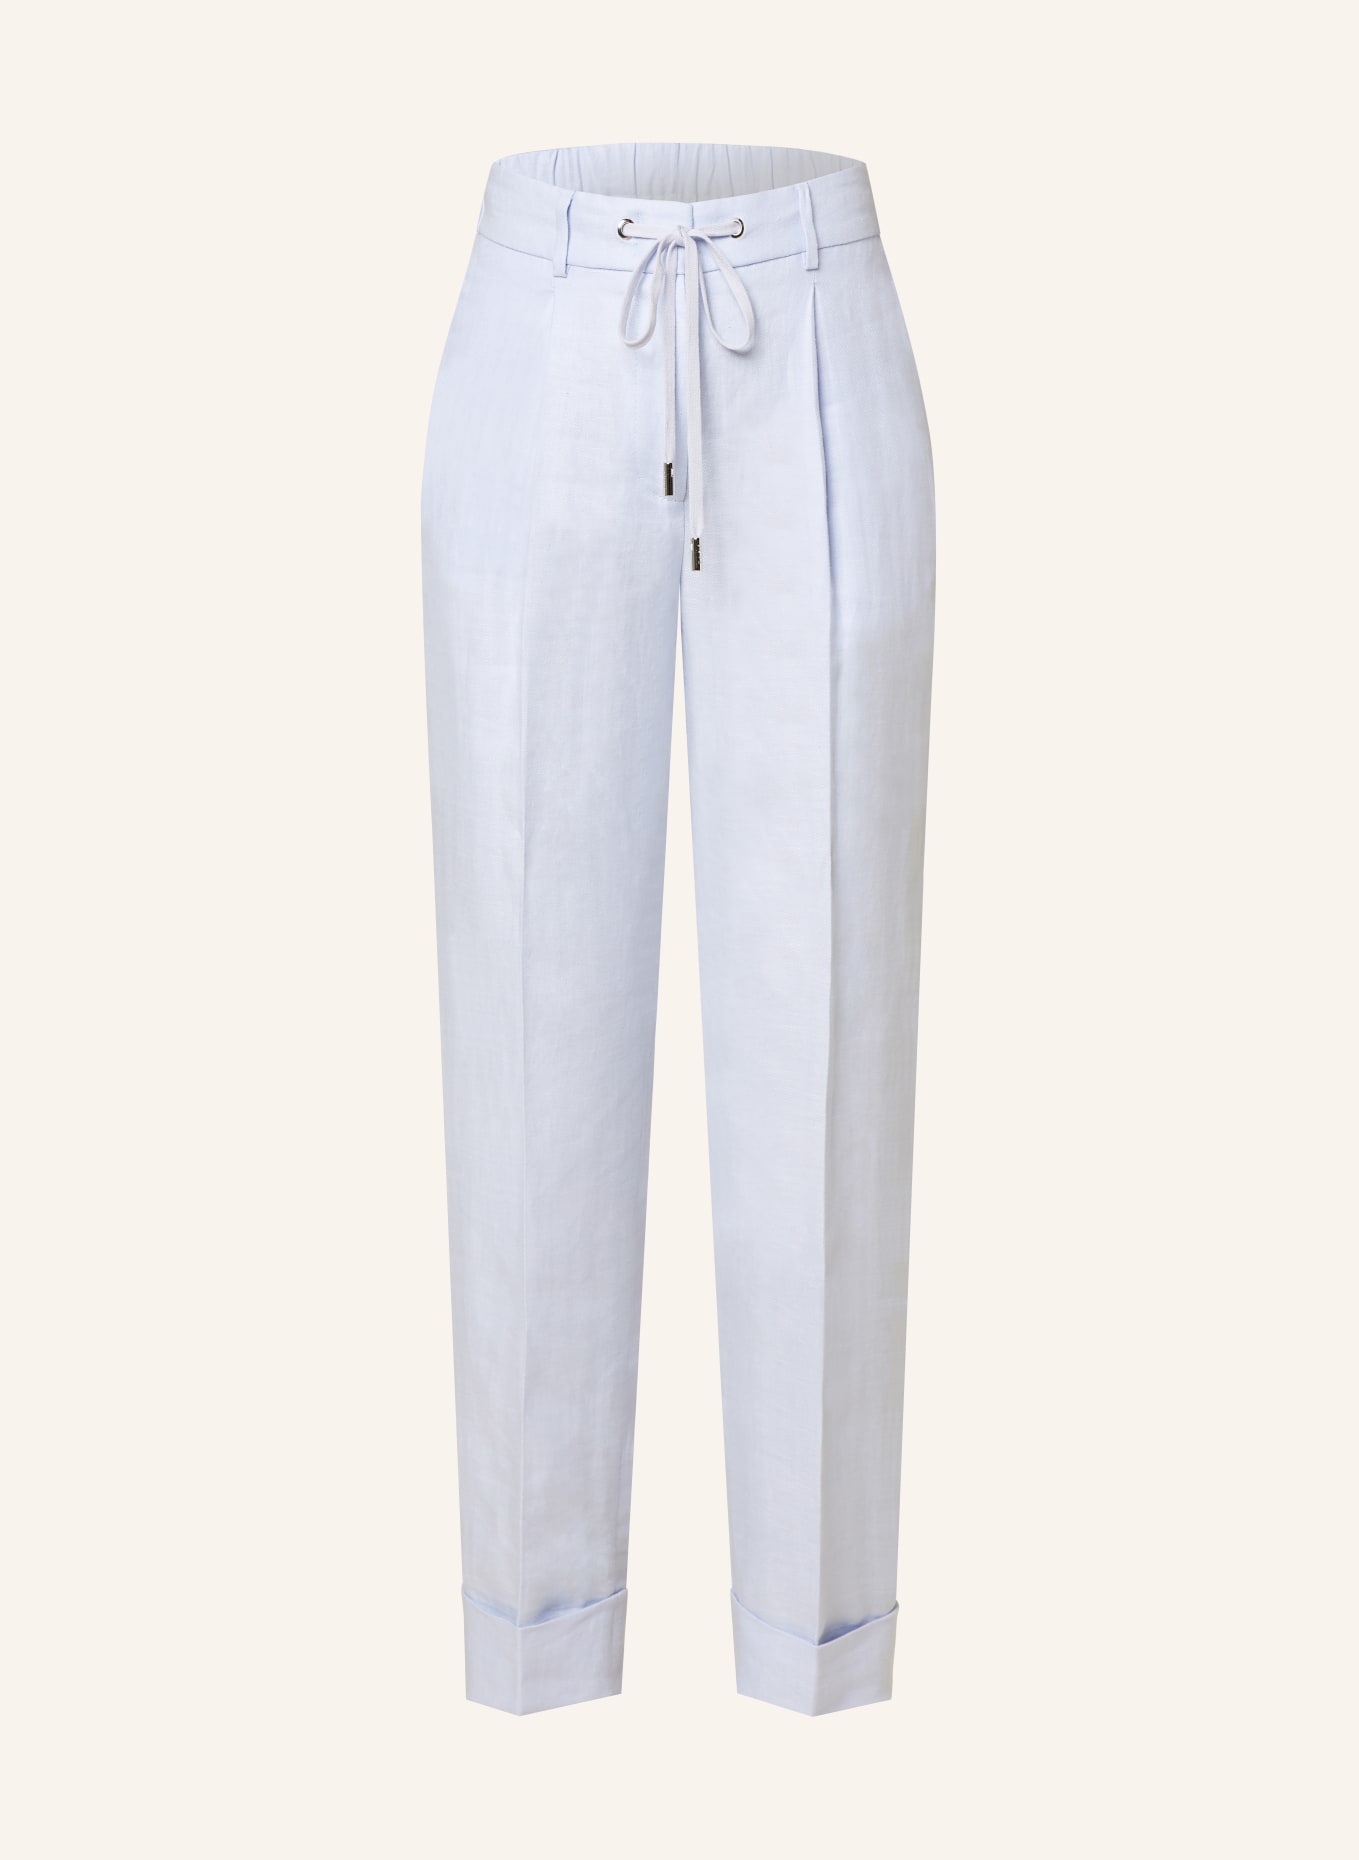 PESERICO EASY 7/8 pants made of linen, Color: LIGHT BLUE (Image 1)